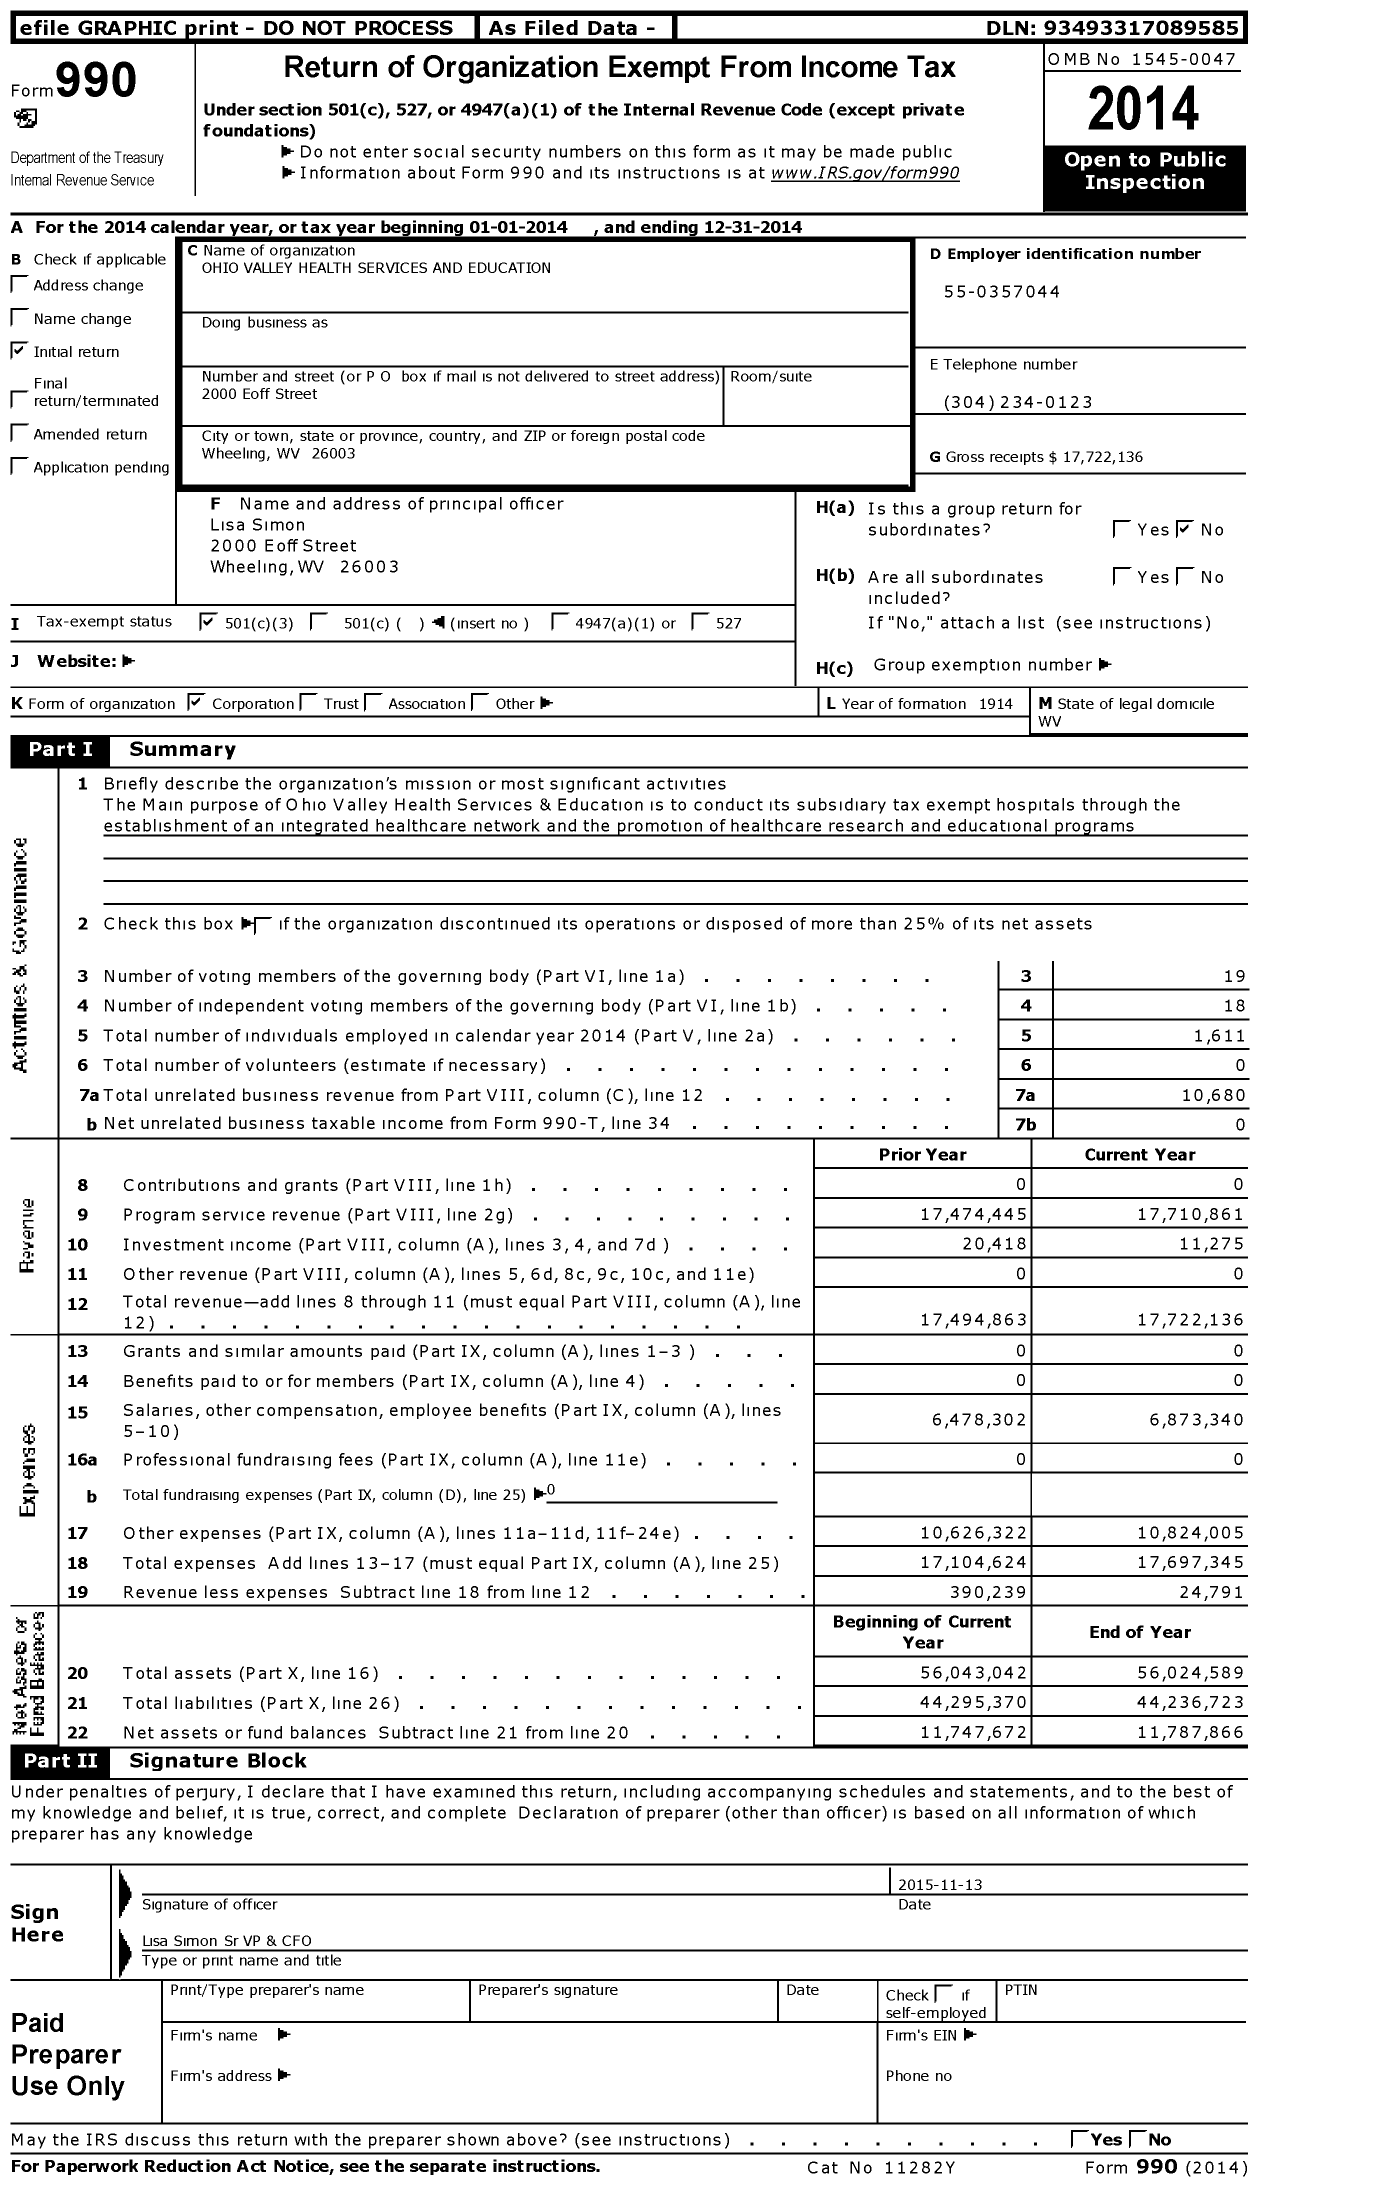 Image of first page of 2014 Form 990 for Ohio Valley Health Services & Education (OVHSE)